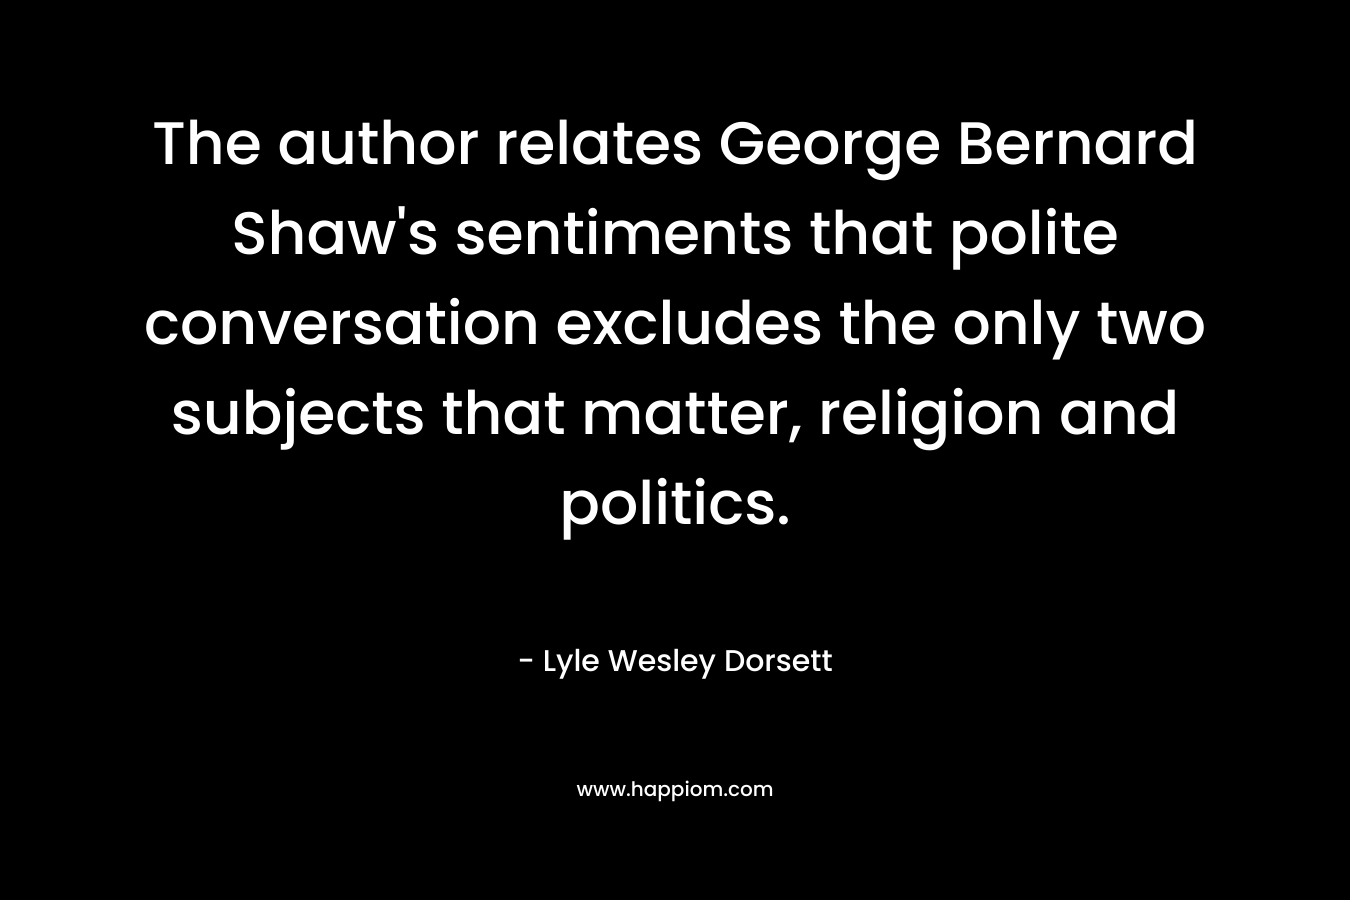 The author relates George Bernard Shaw’s sentiments that polite conversation excludes the only two subjects that matter, religion and politics. – Lyle Wesley Dorsett